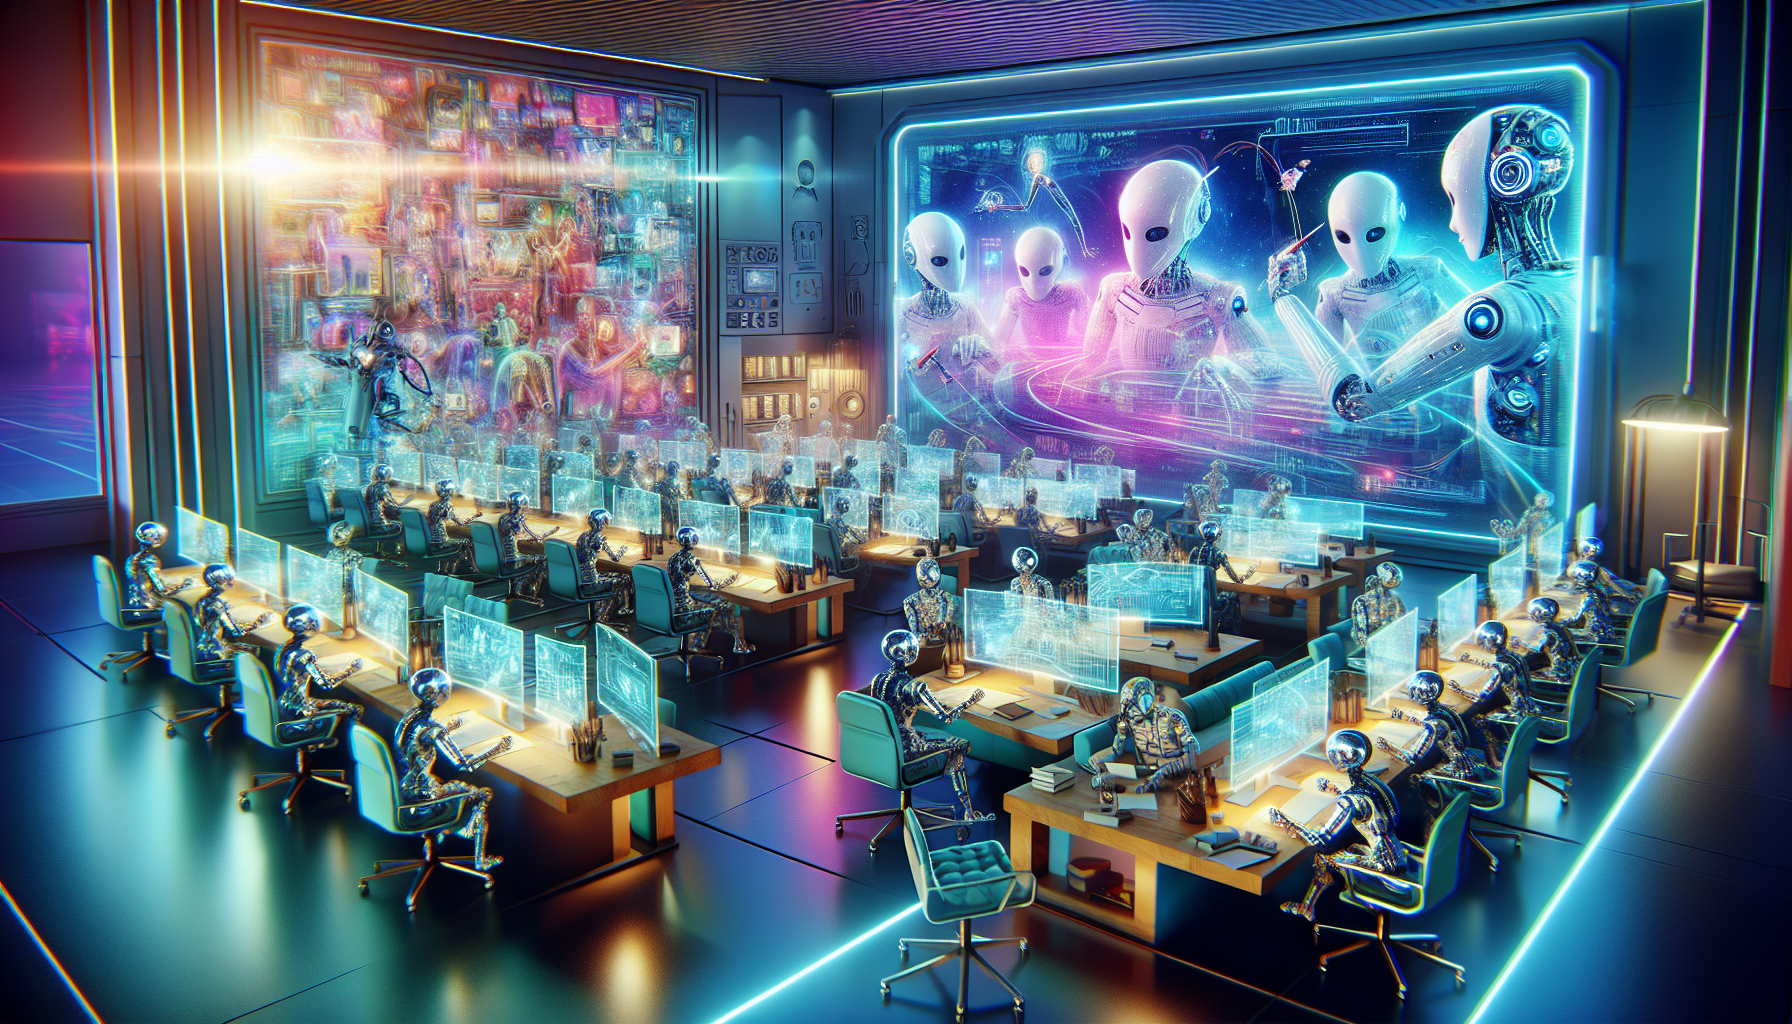 A futuristic writing room filled with AI robots brainstorming and scripting films around a holographic screen displaying intricate storylines and characters.